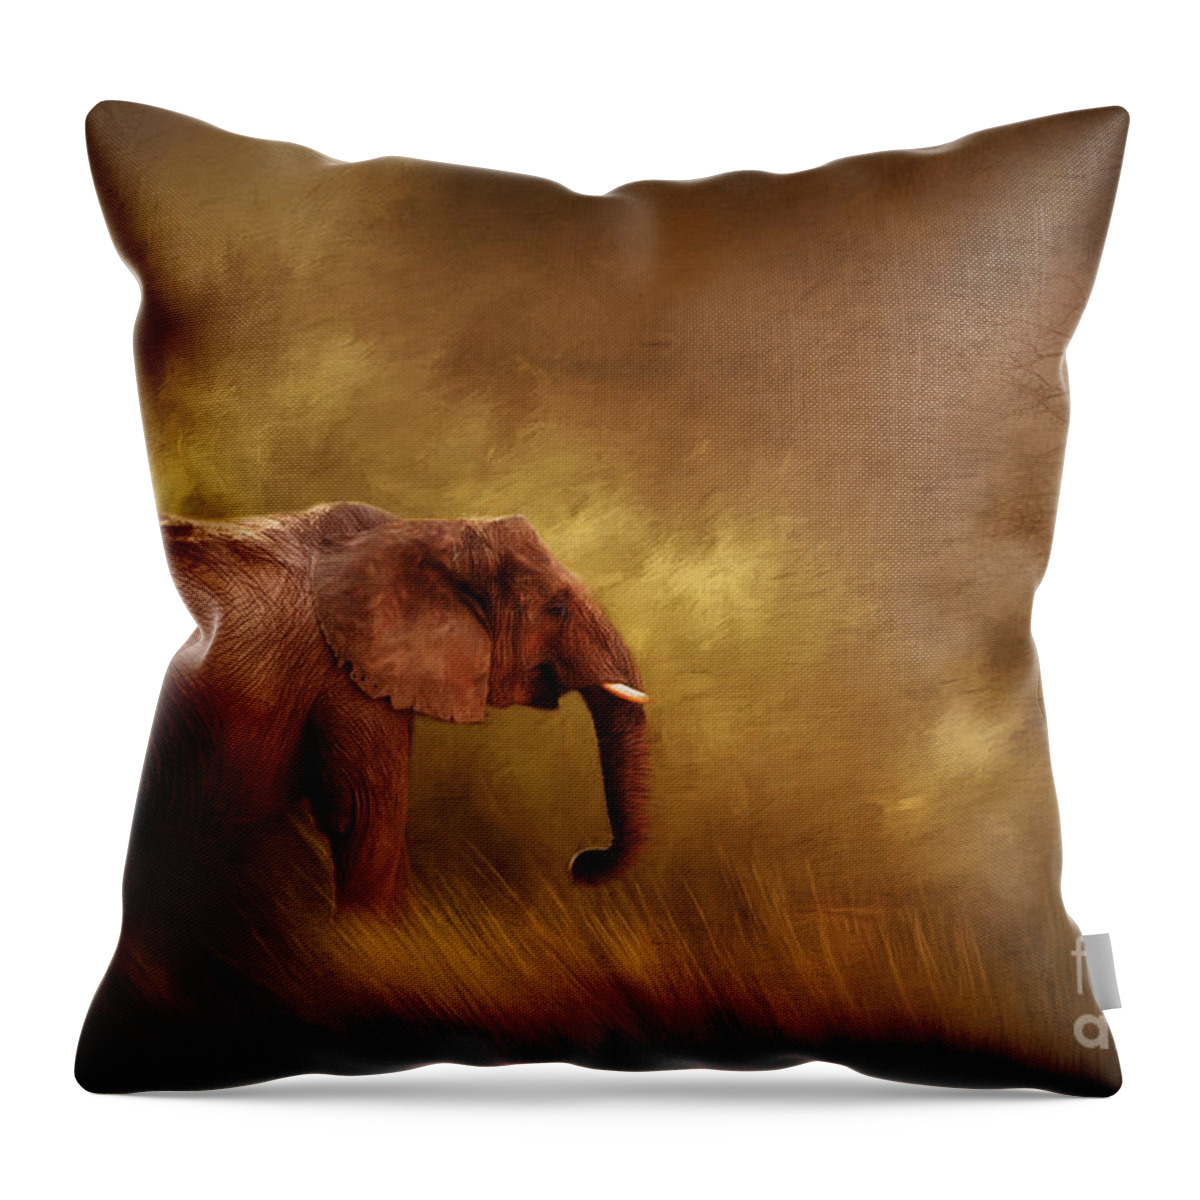 Elephant Throw Pillow featuring the photograph Big Ed by Linda Blair